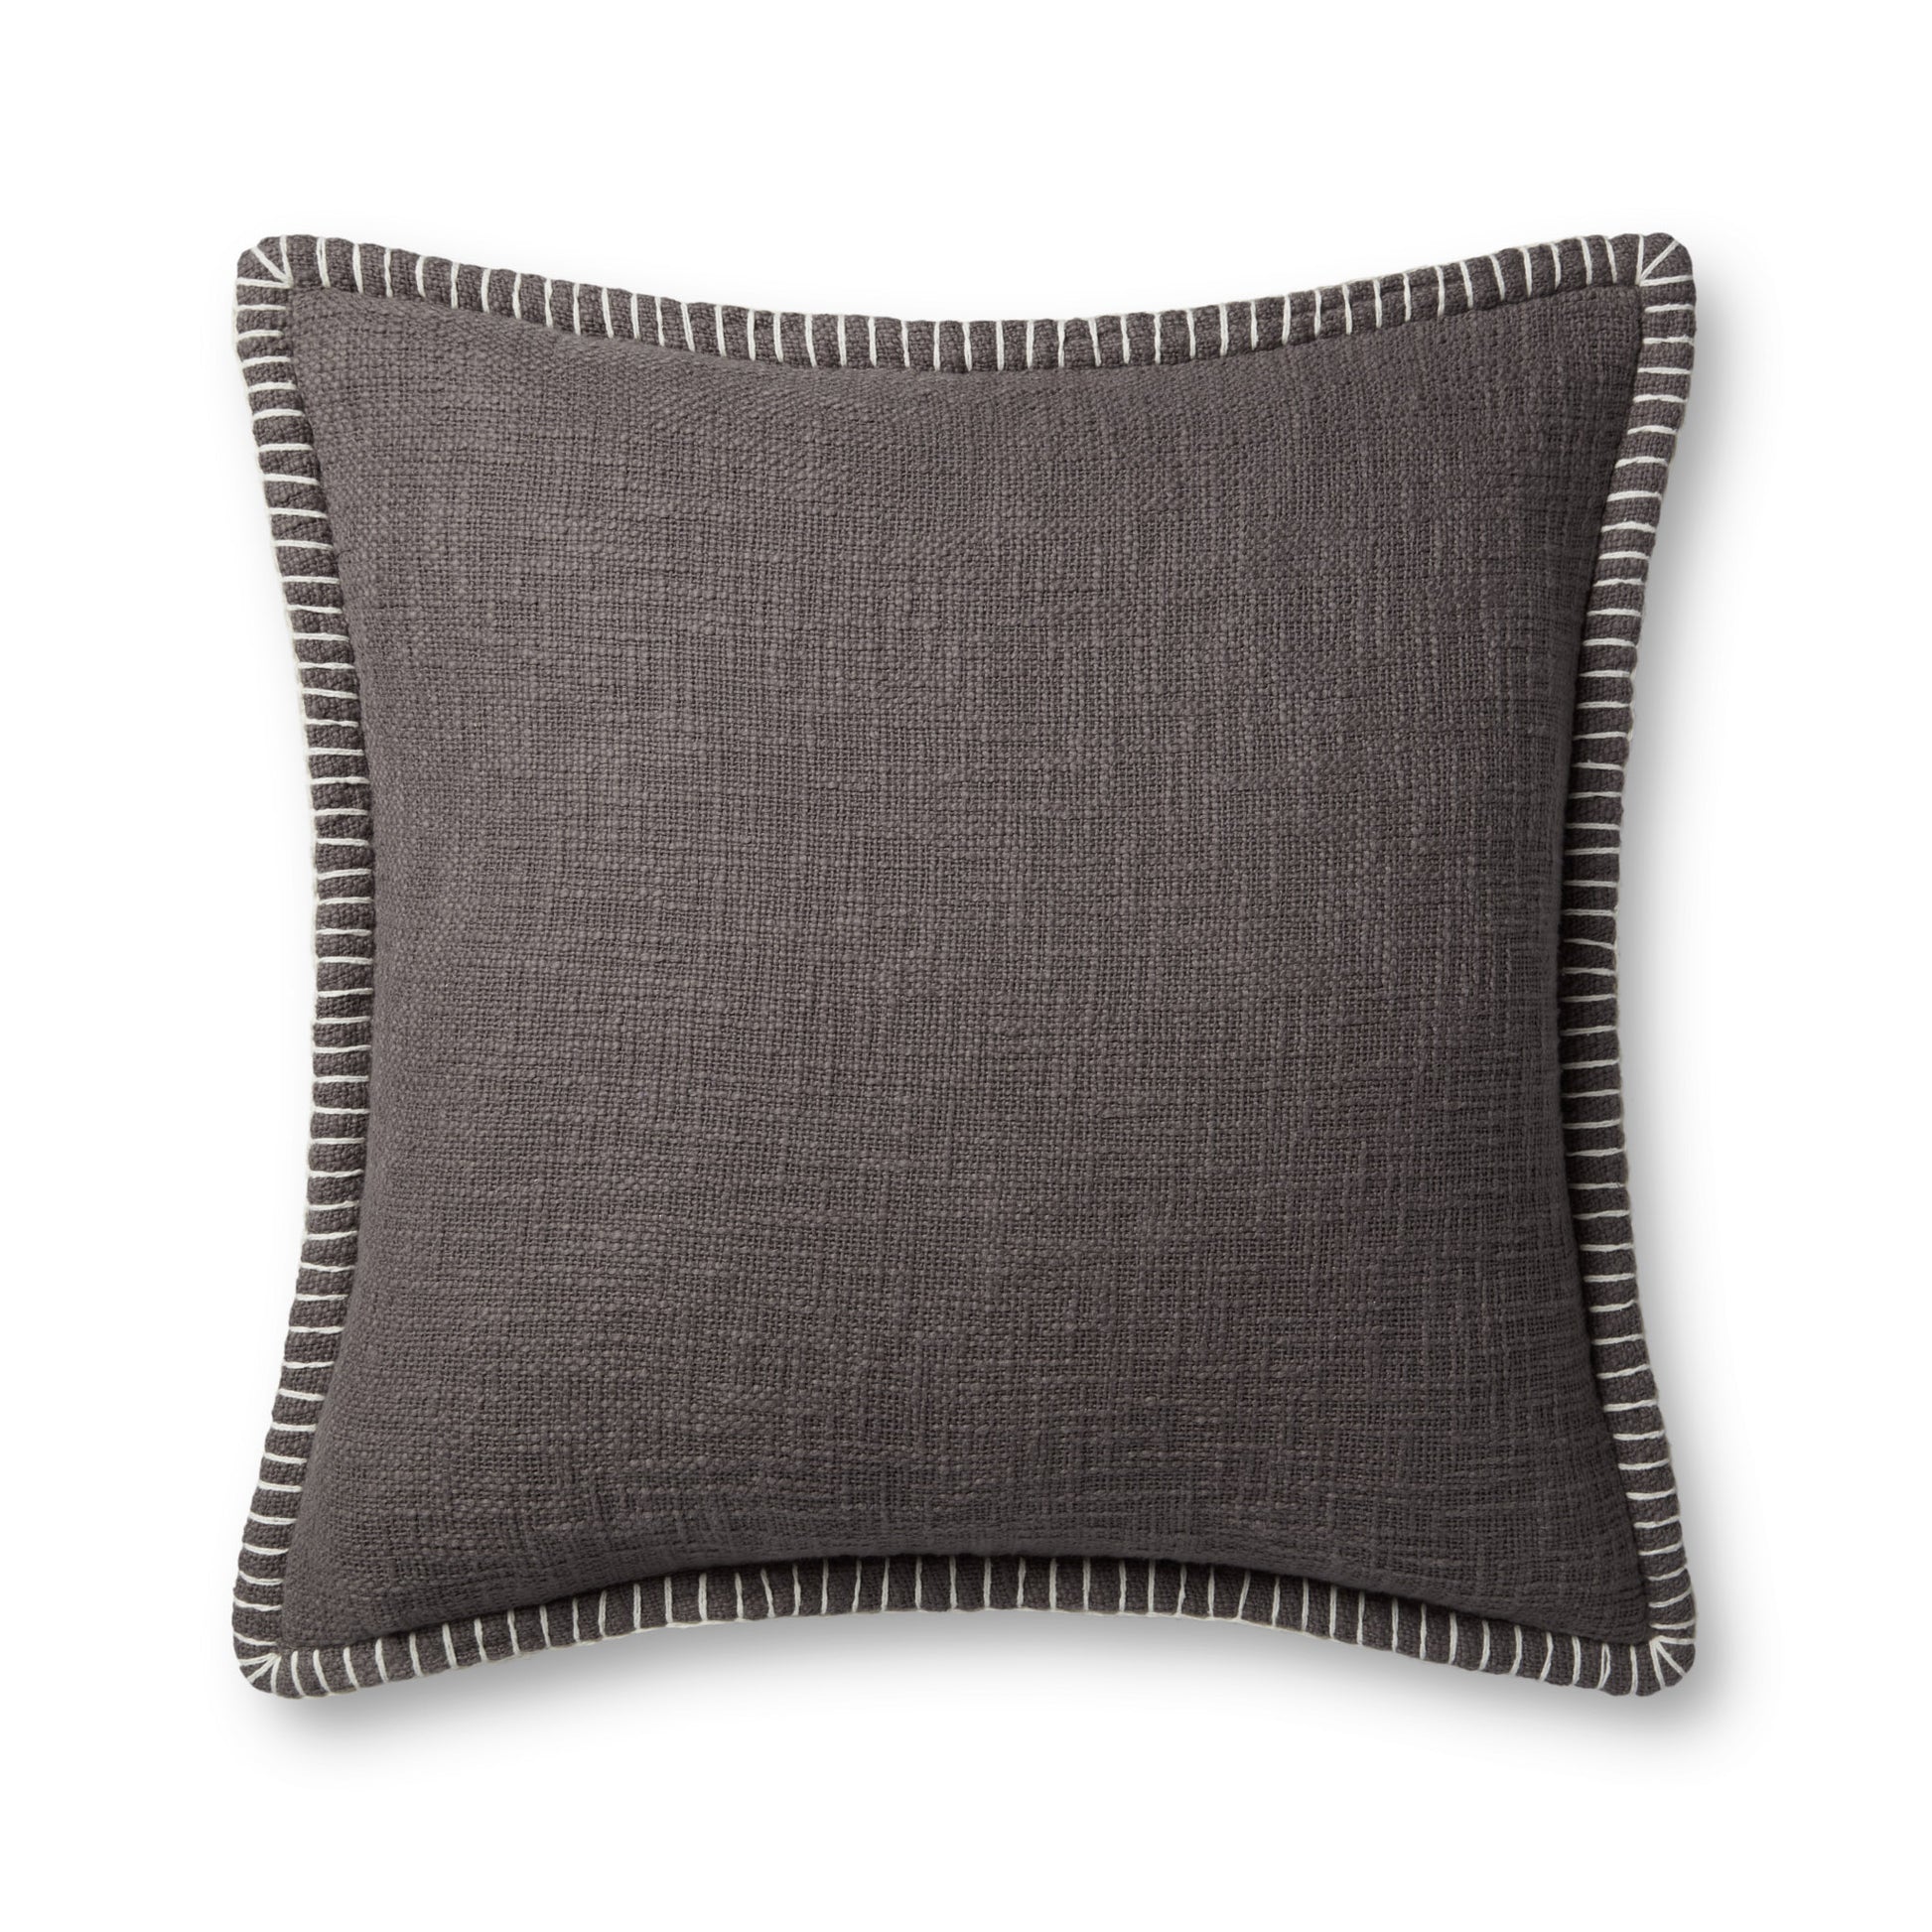 Photo of a pillow;  PLL0109 Grey 22'' x 22'' Cover w/Poly Pillow